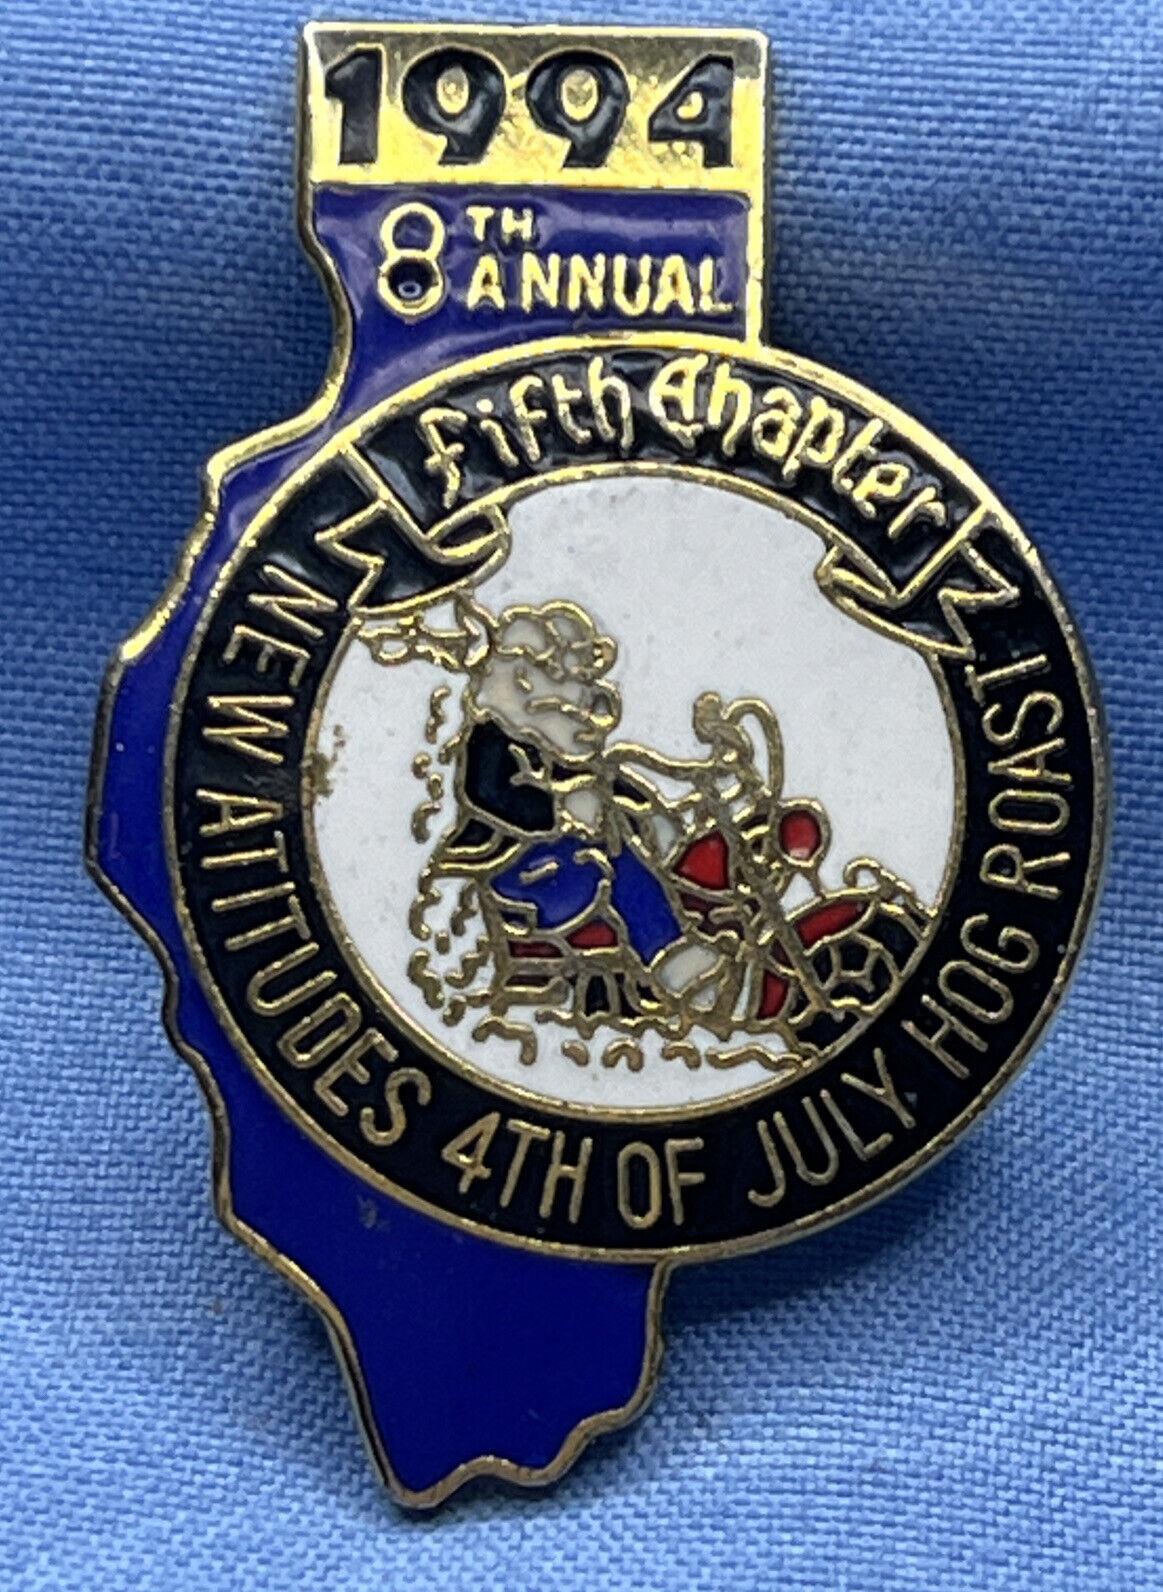 1994 8th ANNUAL FIFTH CHAPTER NEW ATTITUDES  HOG ROAST PIN